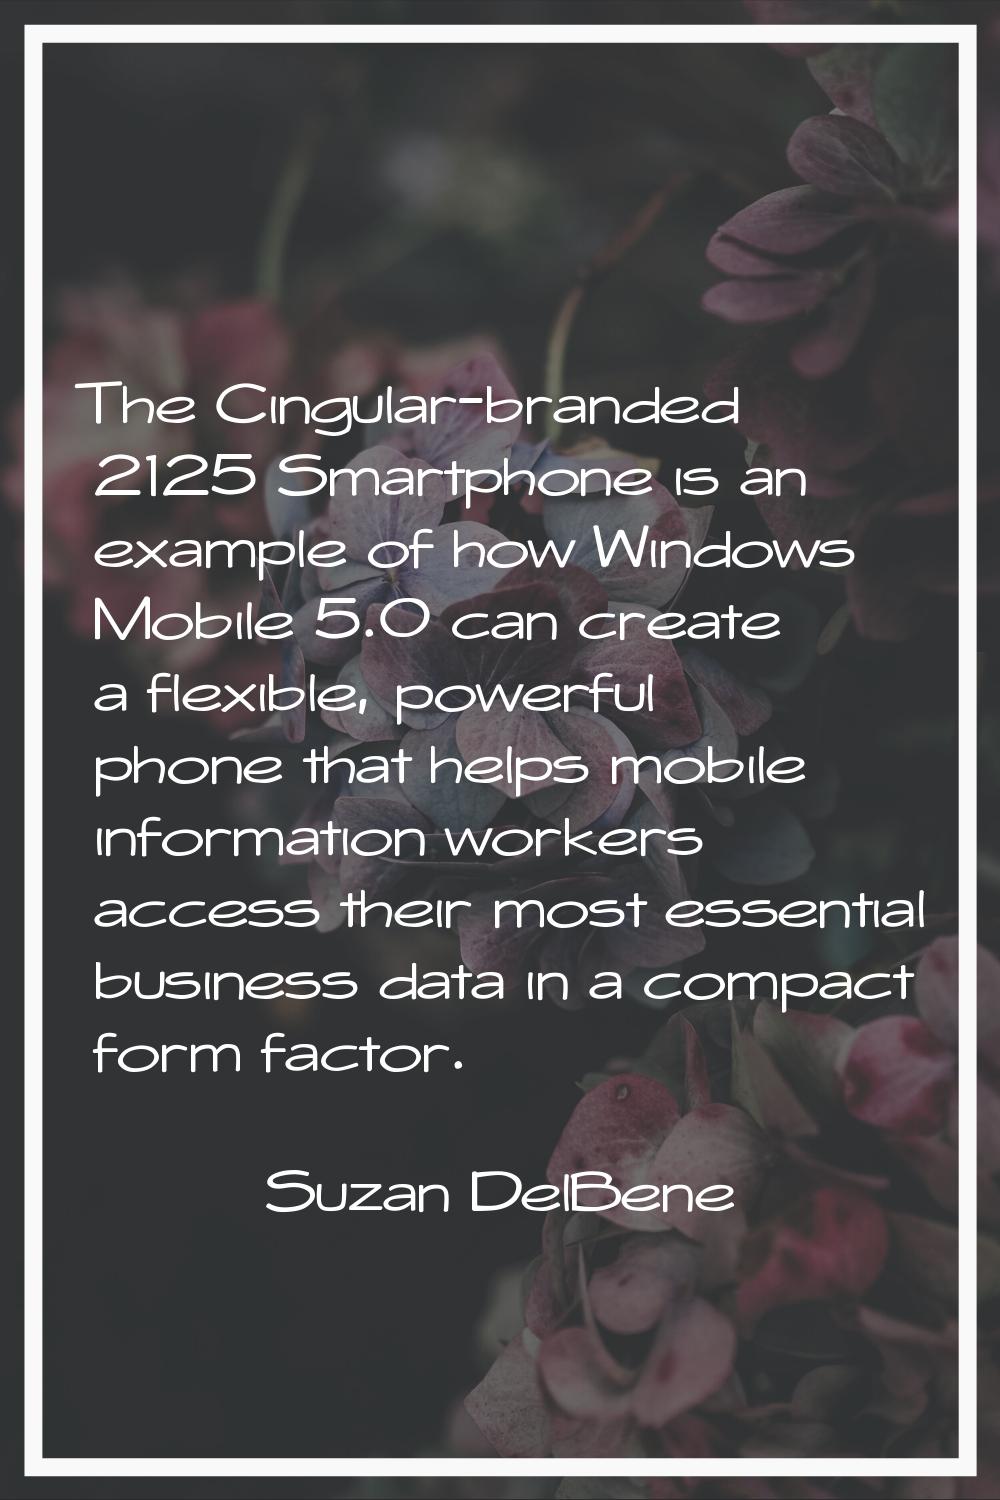 The Cingular-branded 2125 Smartphone is an example of how Windows Mobile 5.0 can create a flexible,